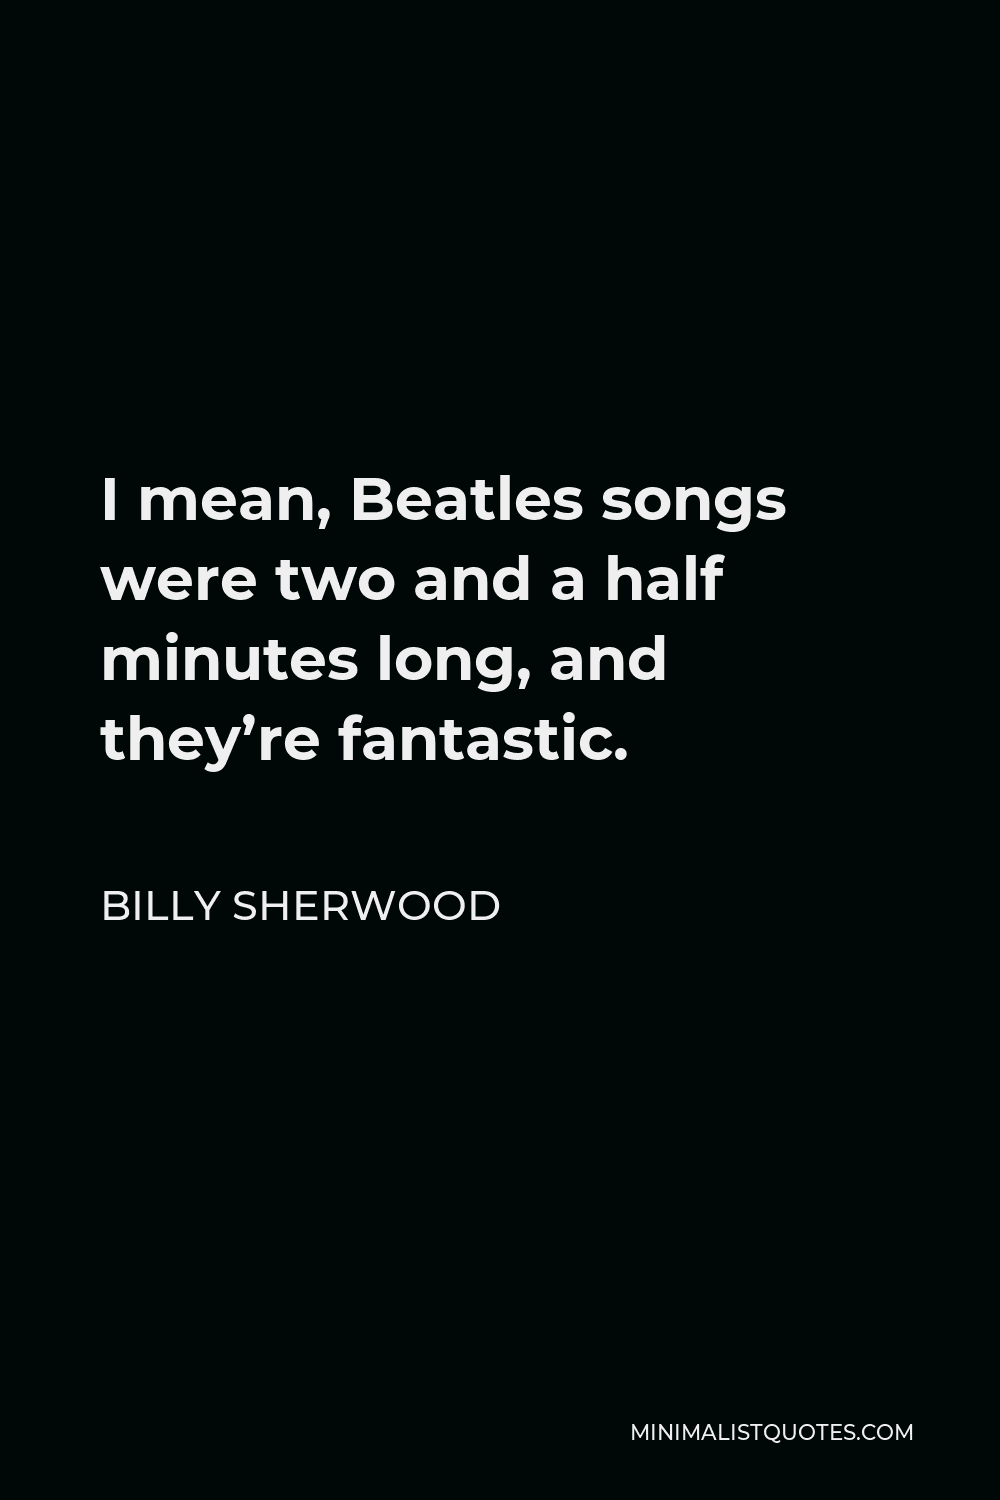 Billy Sherwood Quote - I mean, Beatles songs were two and a half minutes long, and they’re fantastic.